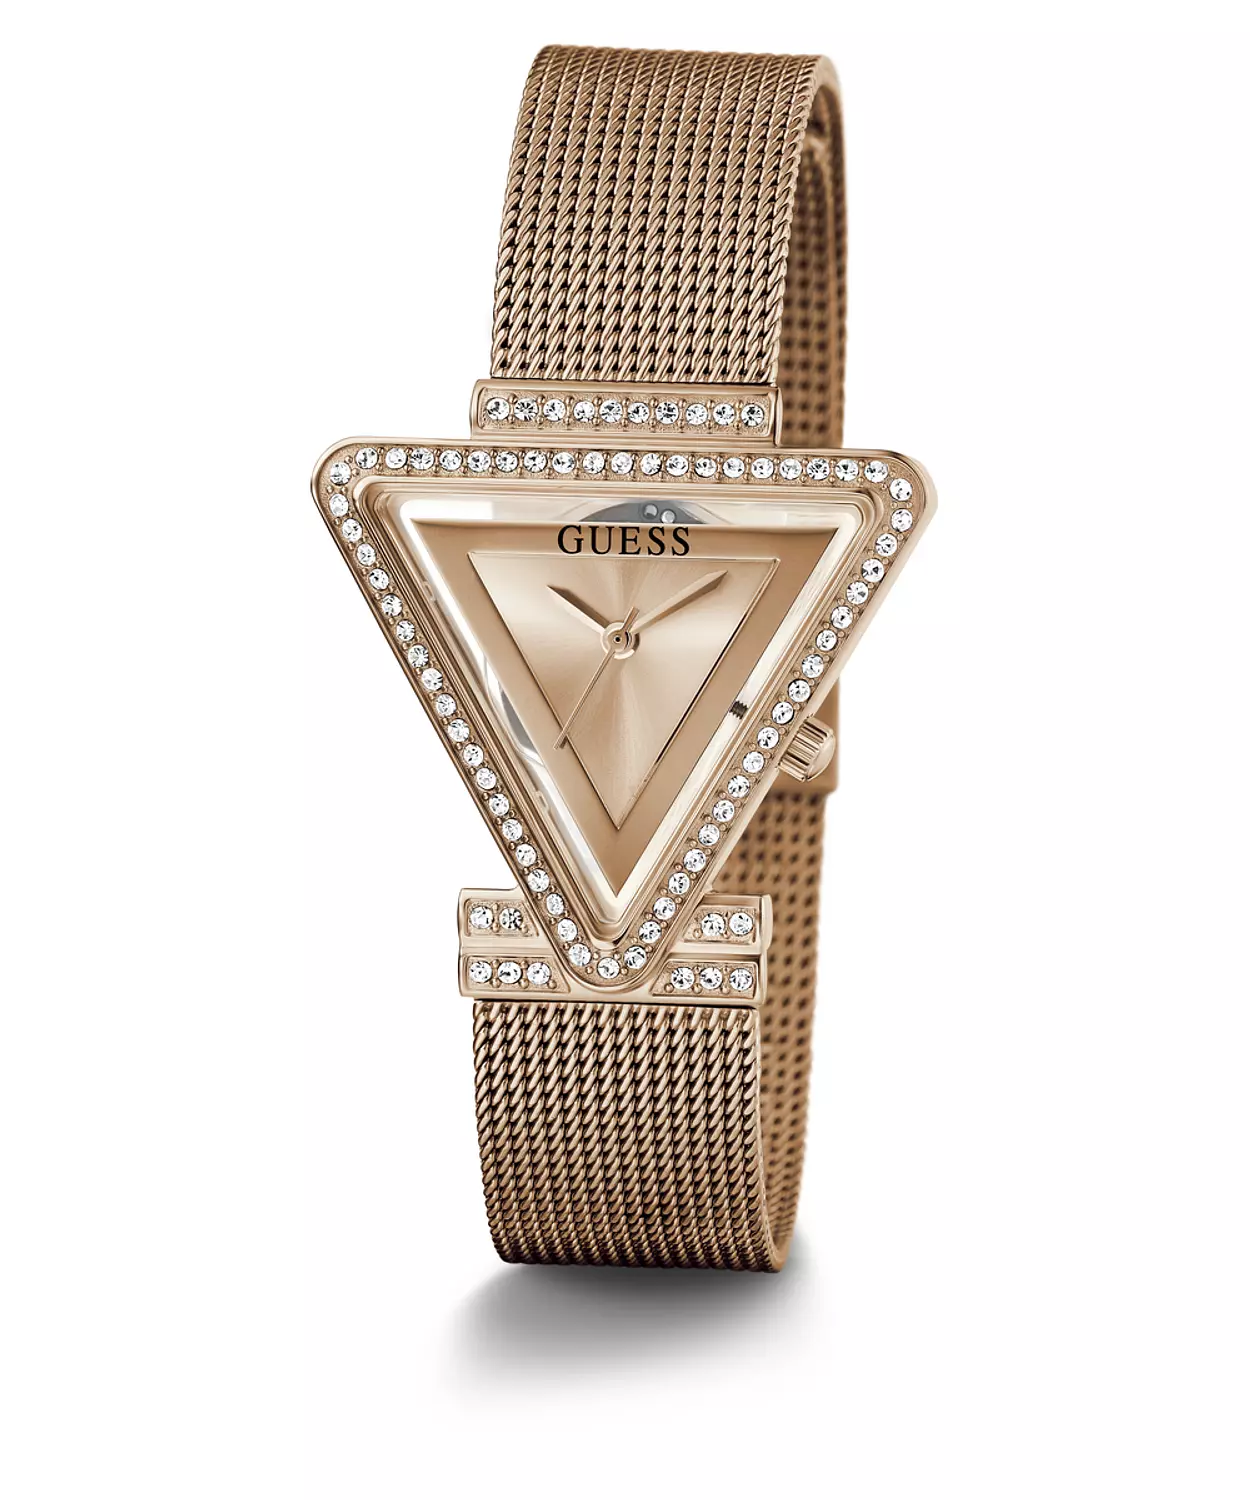 GUESS GW0508L3 ANALOG WATCH  For Women Rose Gold Stainless Steel/Mesh Polished Bracelet  1